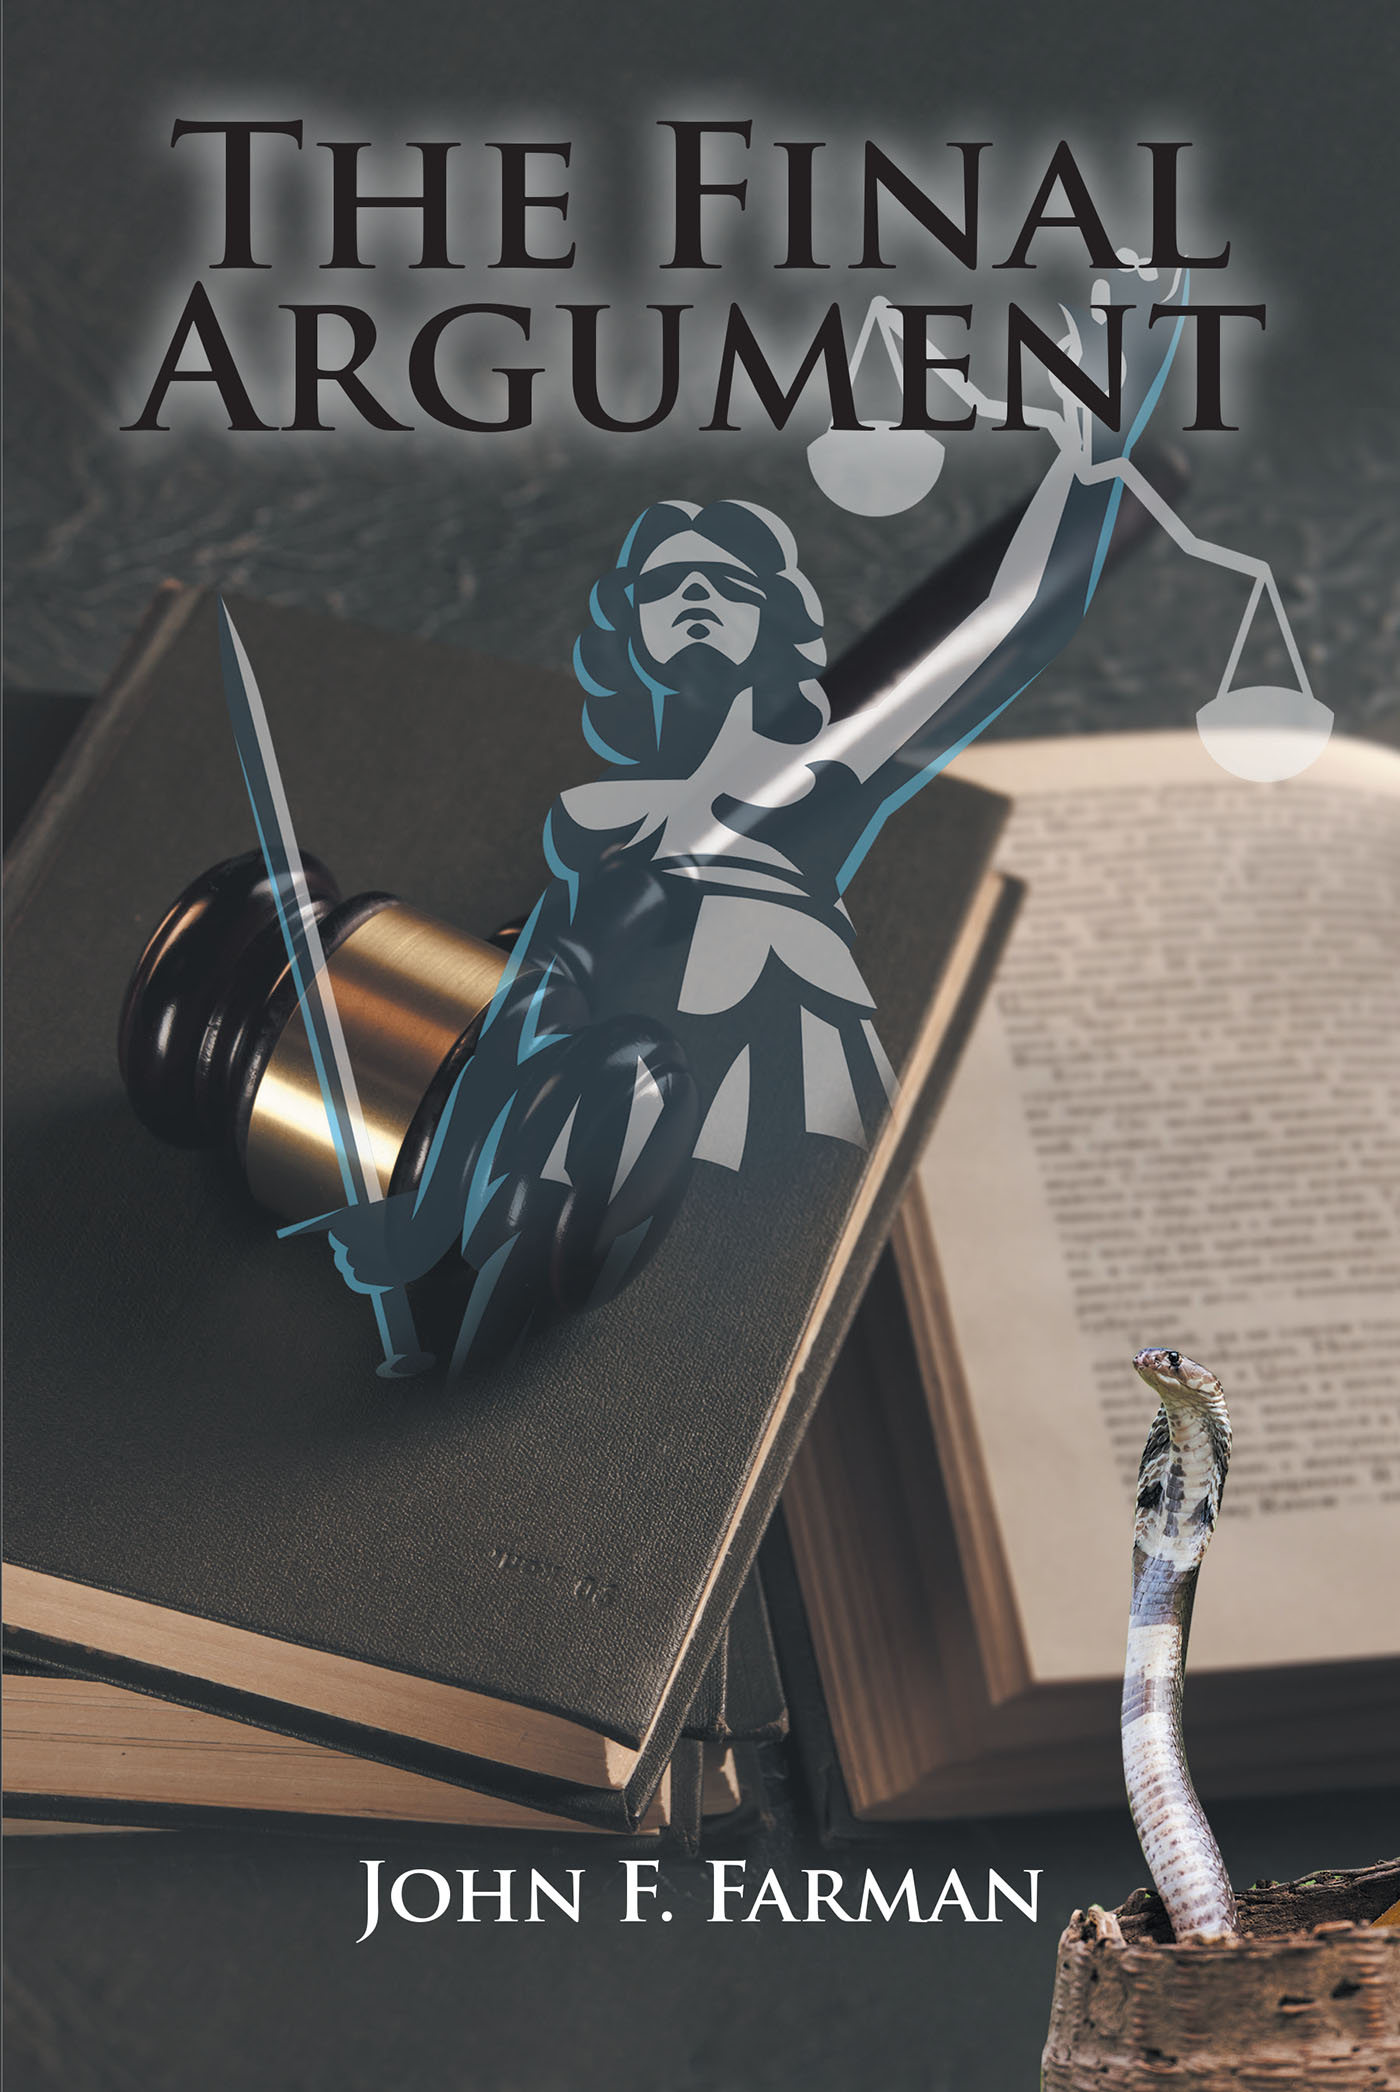 John F. Farman’s Newly Released "The Final Argument" is an Intense Fiction That Finds the Foundation of Mankind’s Faith Rocked Following a Terrible War